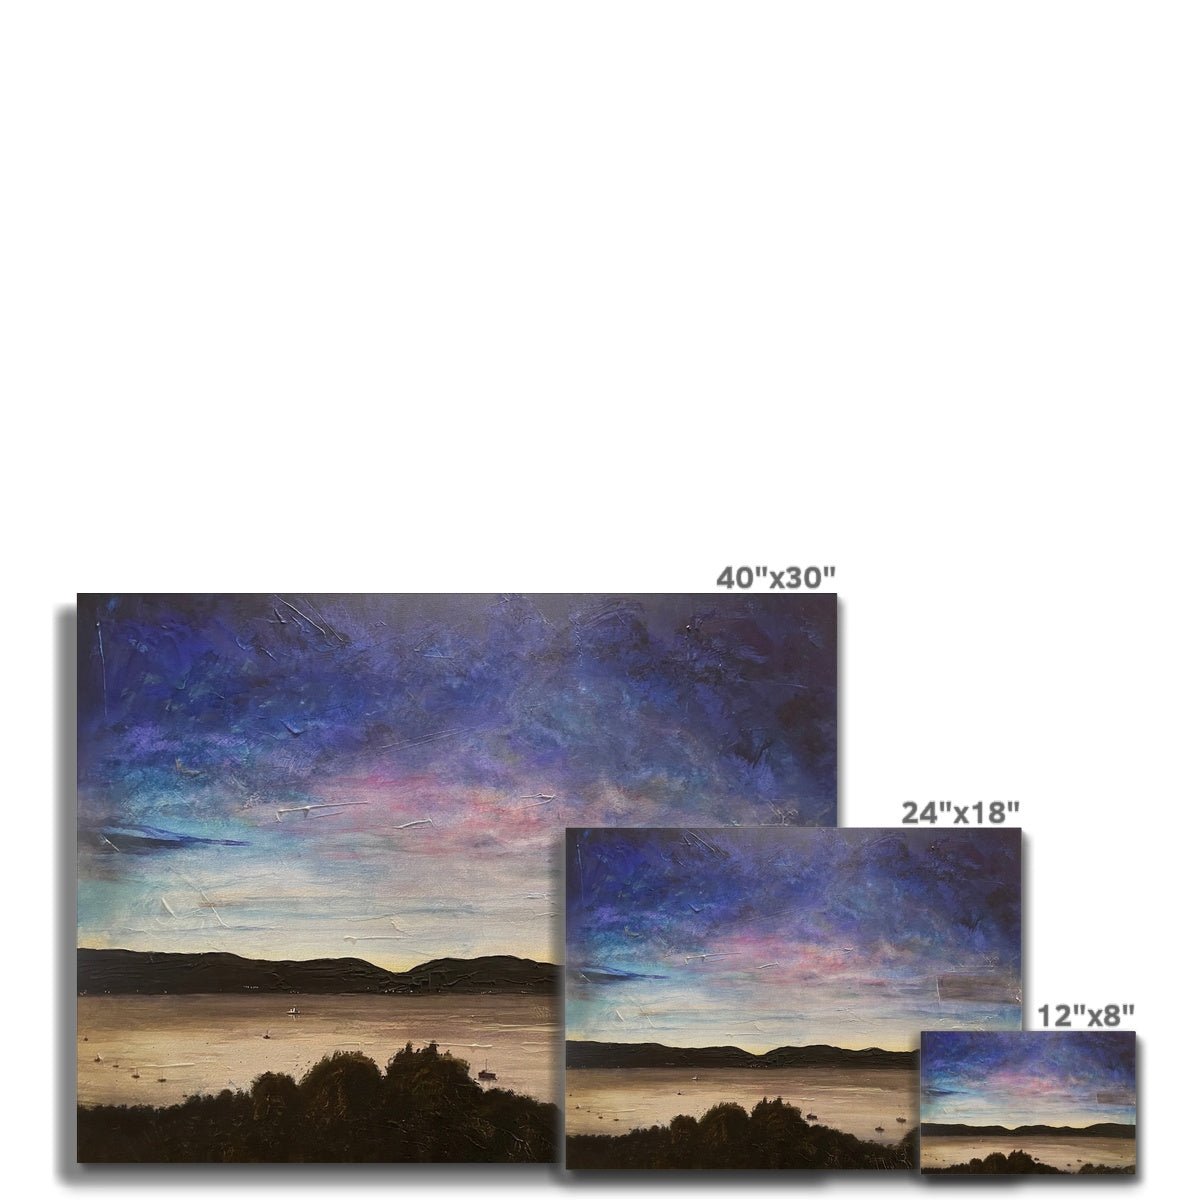 River Clyde Twilight Painting | Canvas From Scotland-Contemporary Stretched Canvas Prints-River Clyde Art Gallery-Paintings, Prints, Homeware, Art Gifts From Scotland By Scottish Artist Kevin Hunter